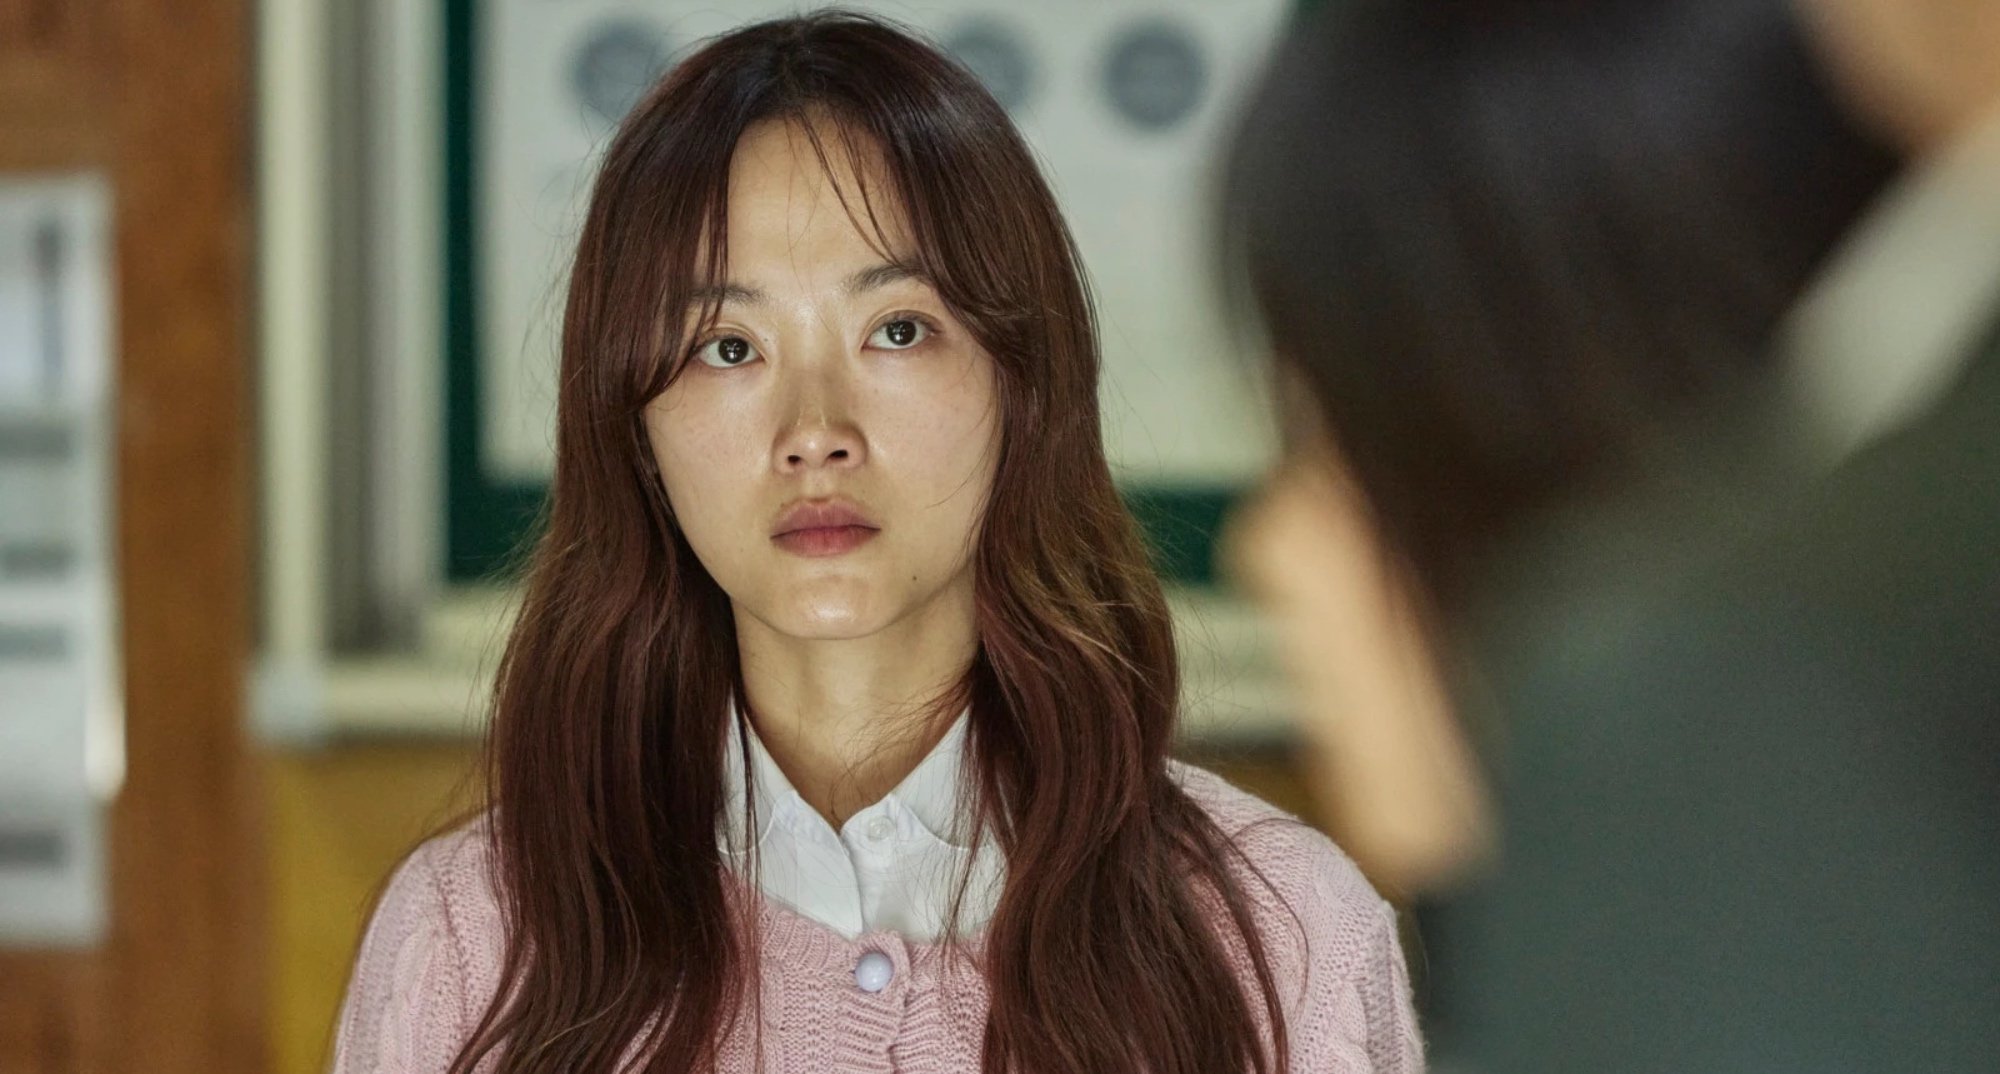 Actor Lee Yoo-mi as Na-yeon in 'All of Us Are Dead' wearing pink sweater.